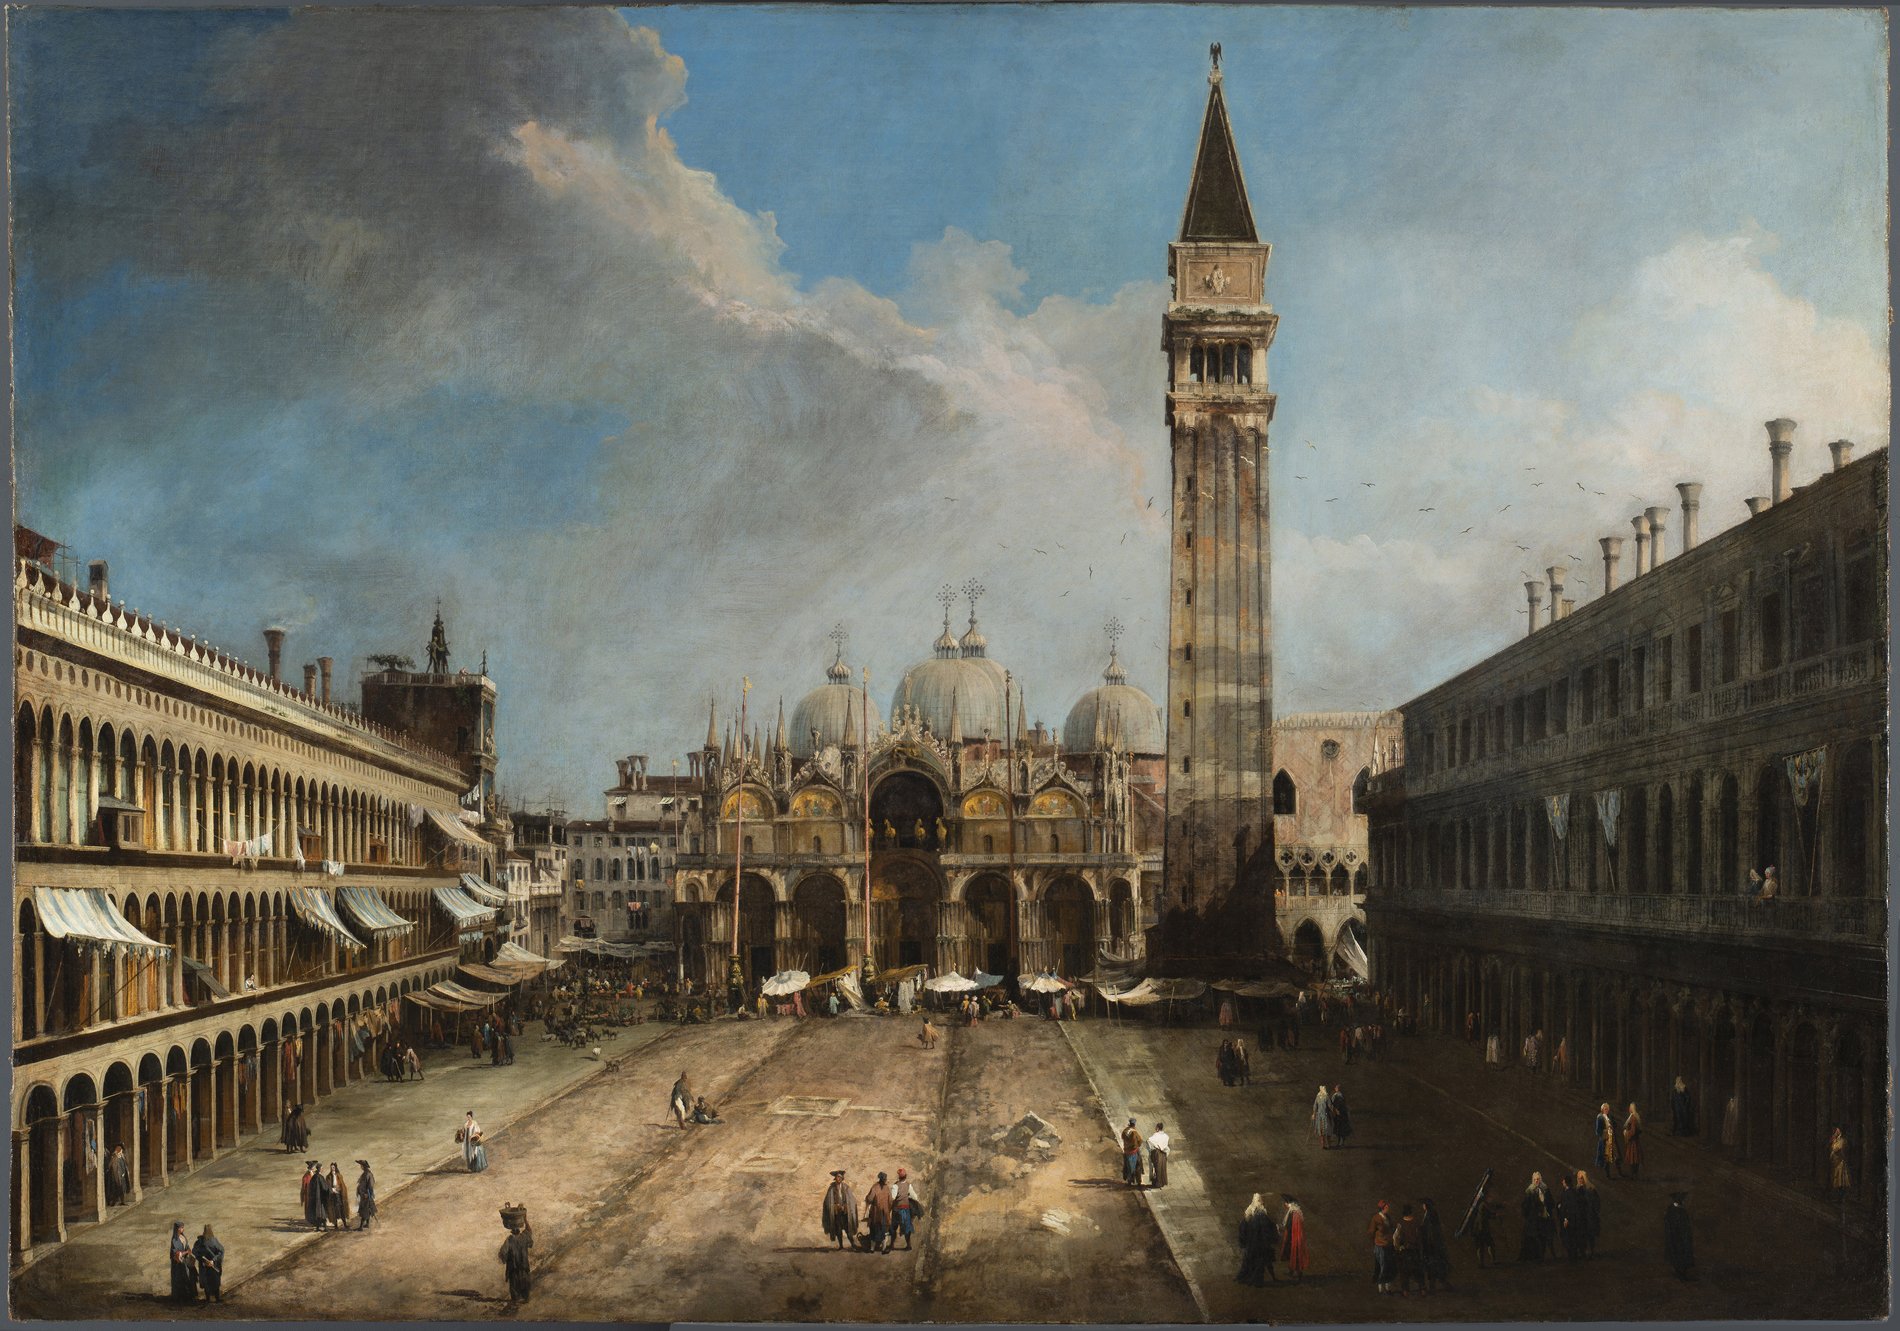 “The Piazza San Marco in Venice” by Canaletto, after restoration